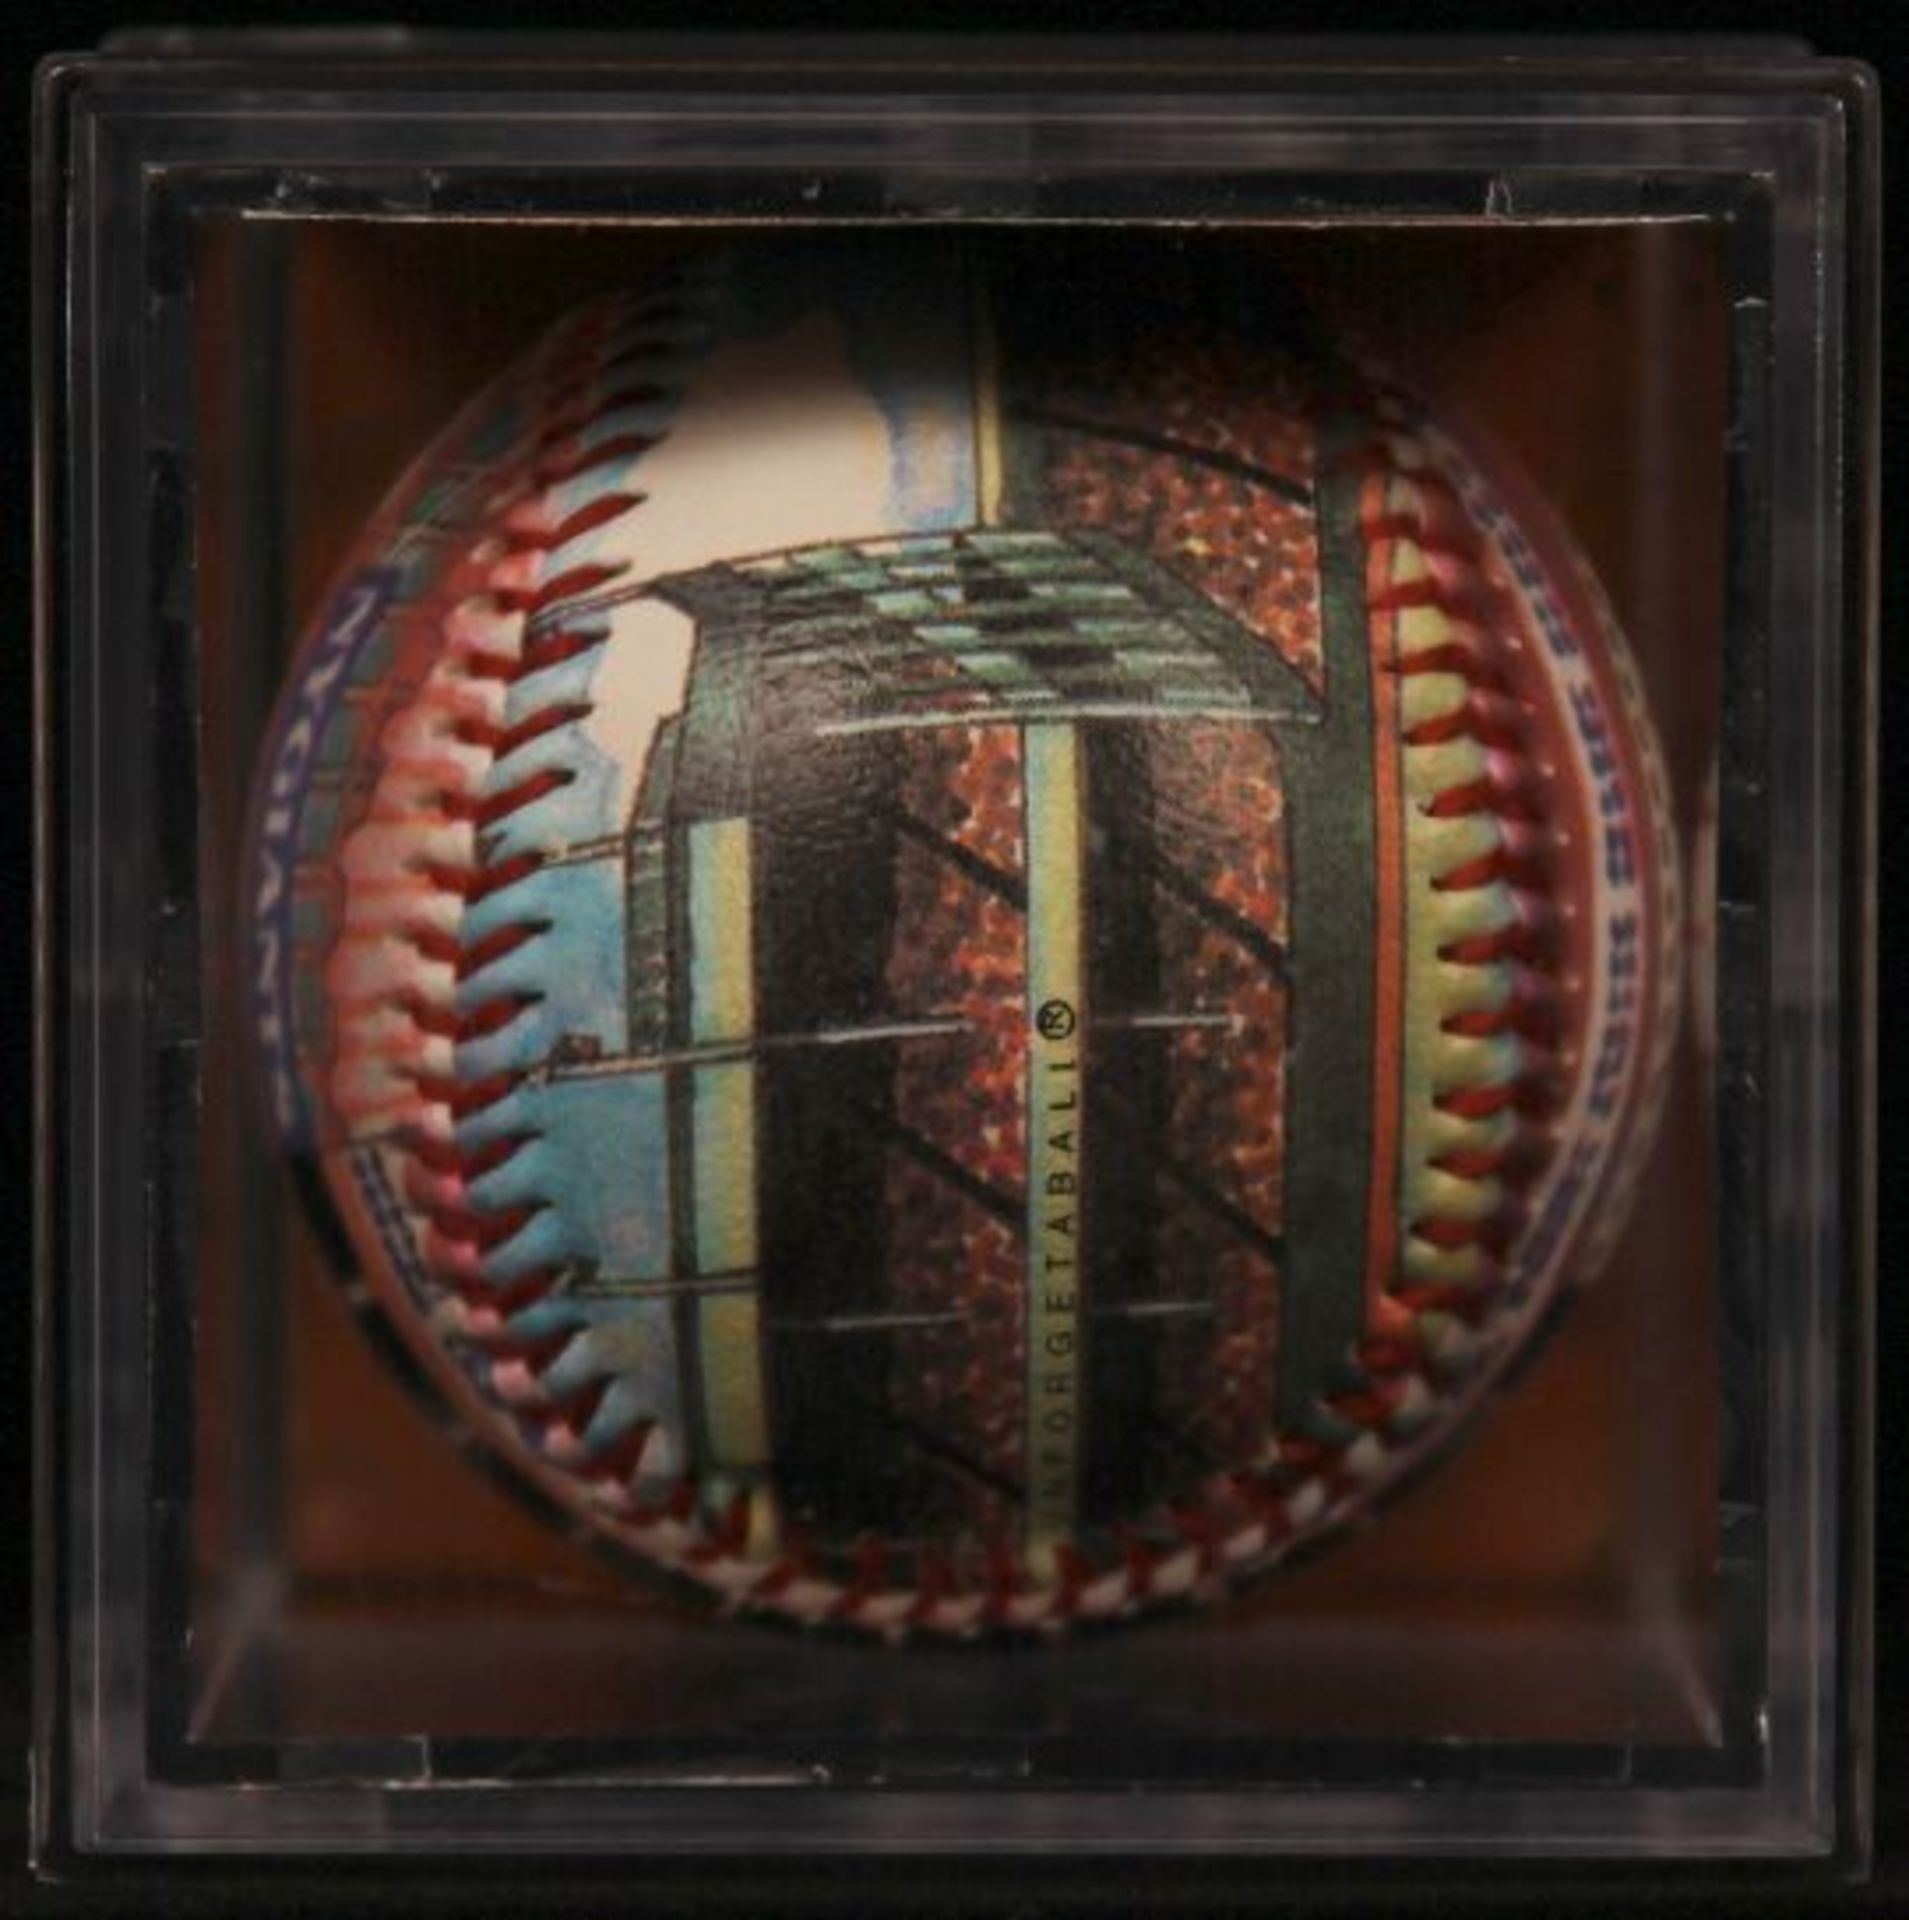 Unforgettaball! "Polo Grounds" Collectable Baseball - Image 4 of 4